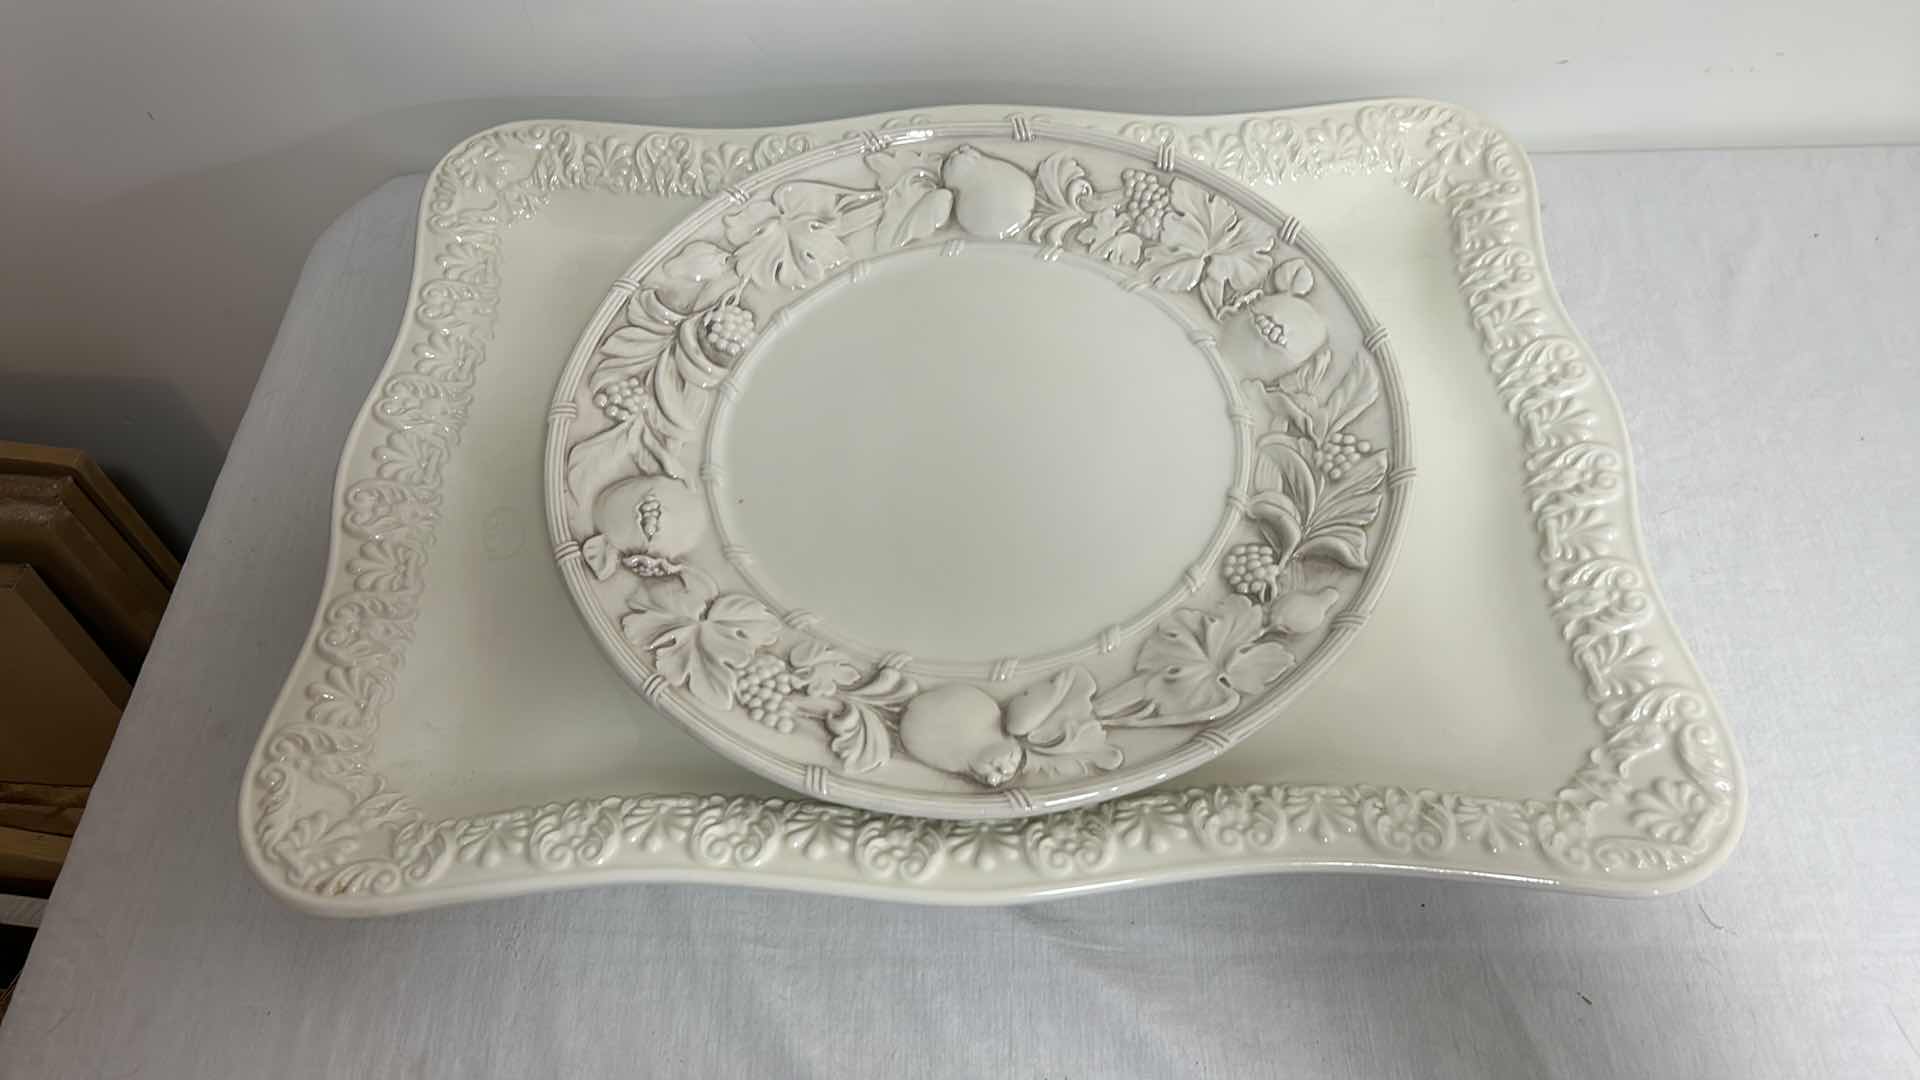 Photo 6 of PORCELAIN TRAY HANDMADE IN ITALY 22” x 17 AND GRANATE PLATE MADE IN ITALY